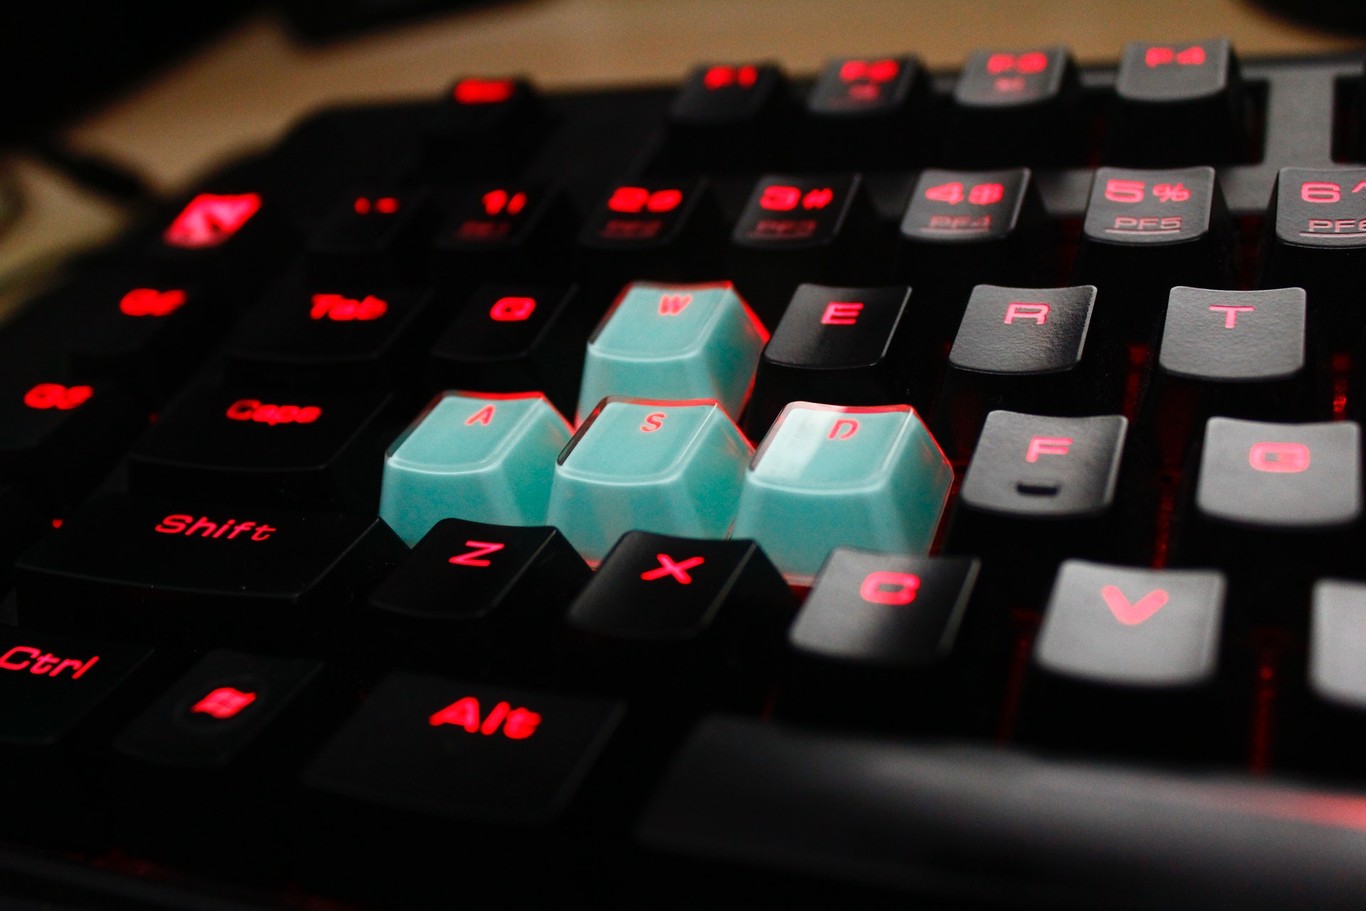 Best gaming keyboards which one to buy and eight recommended gaming keyboards for different users and budgets